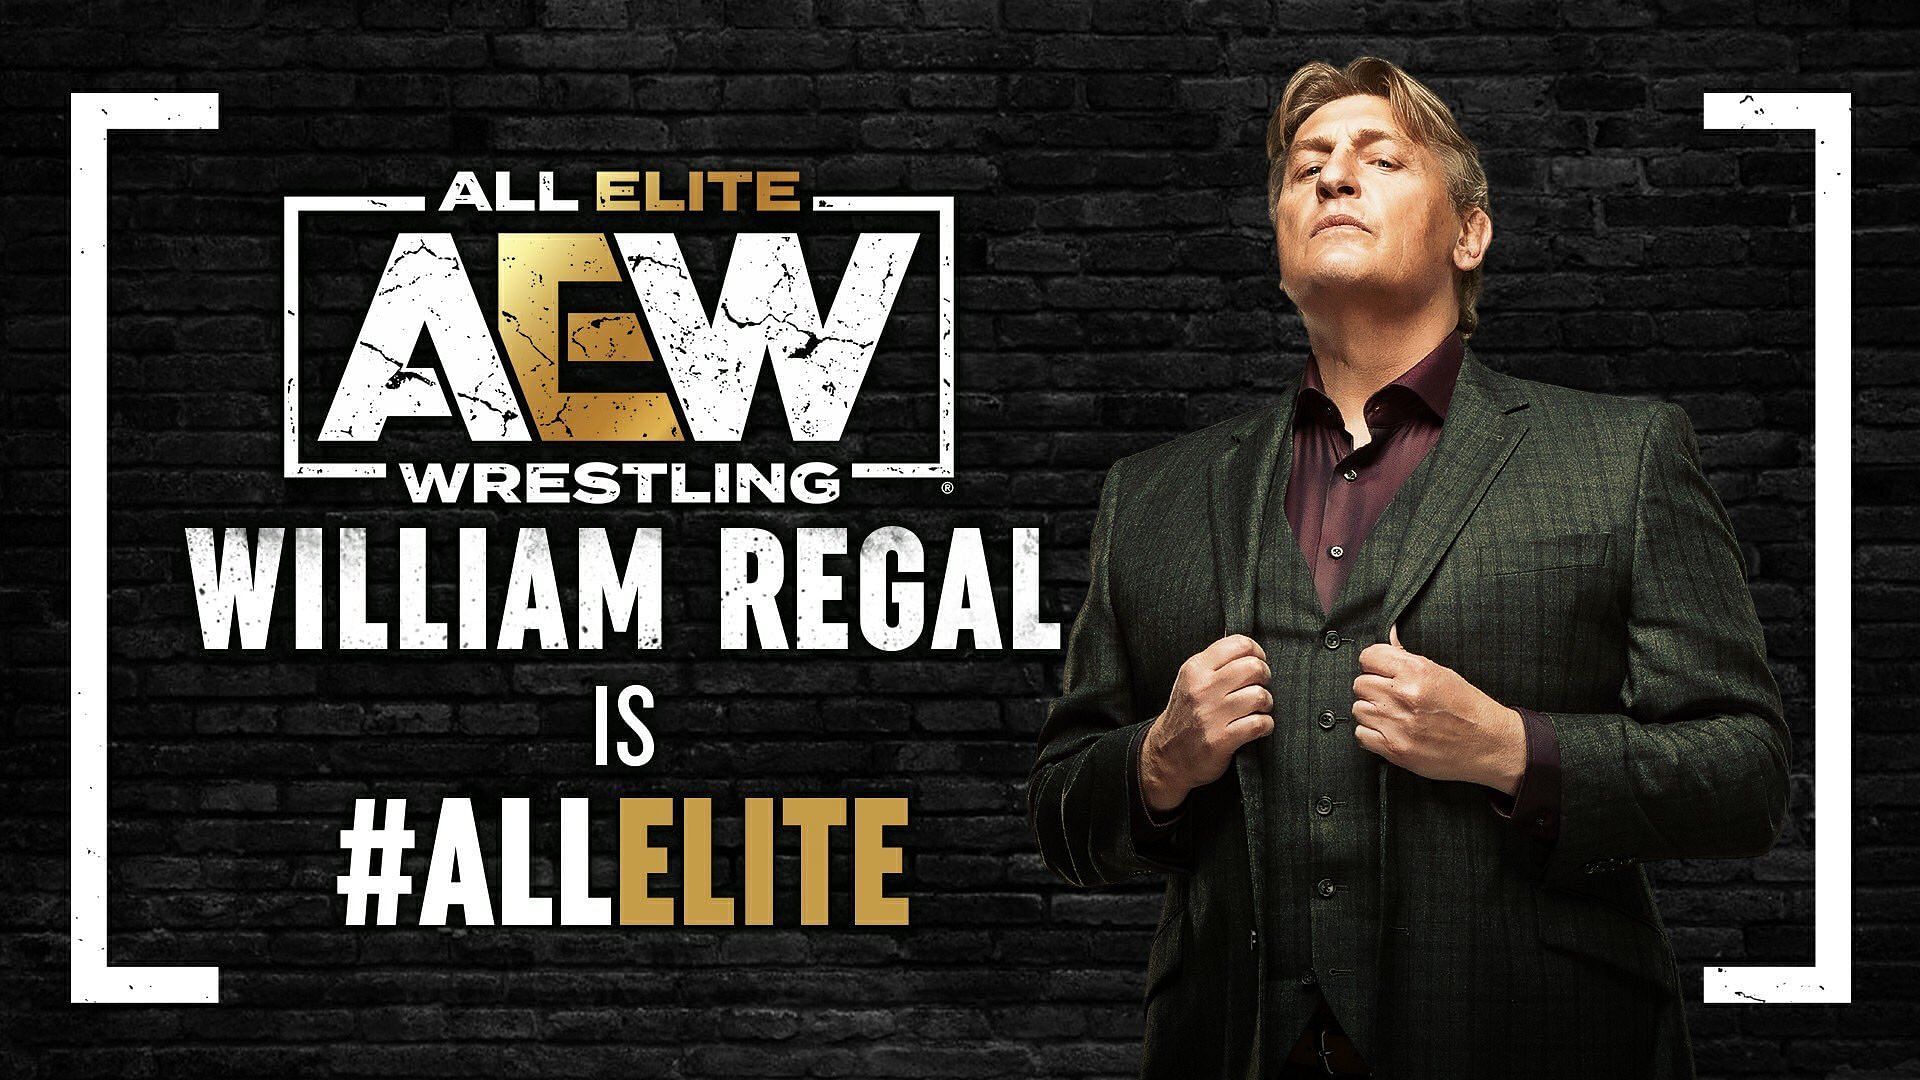 William Regal made a surprise appearance at Revolution 2022